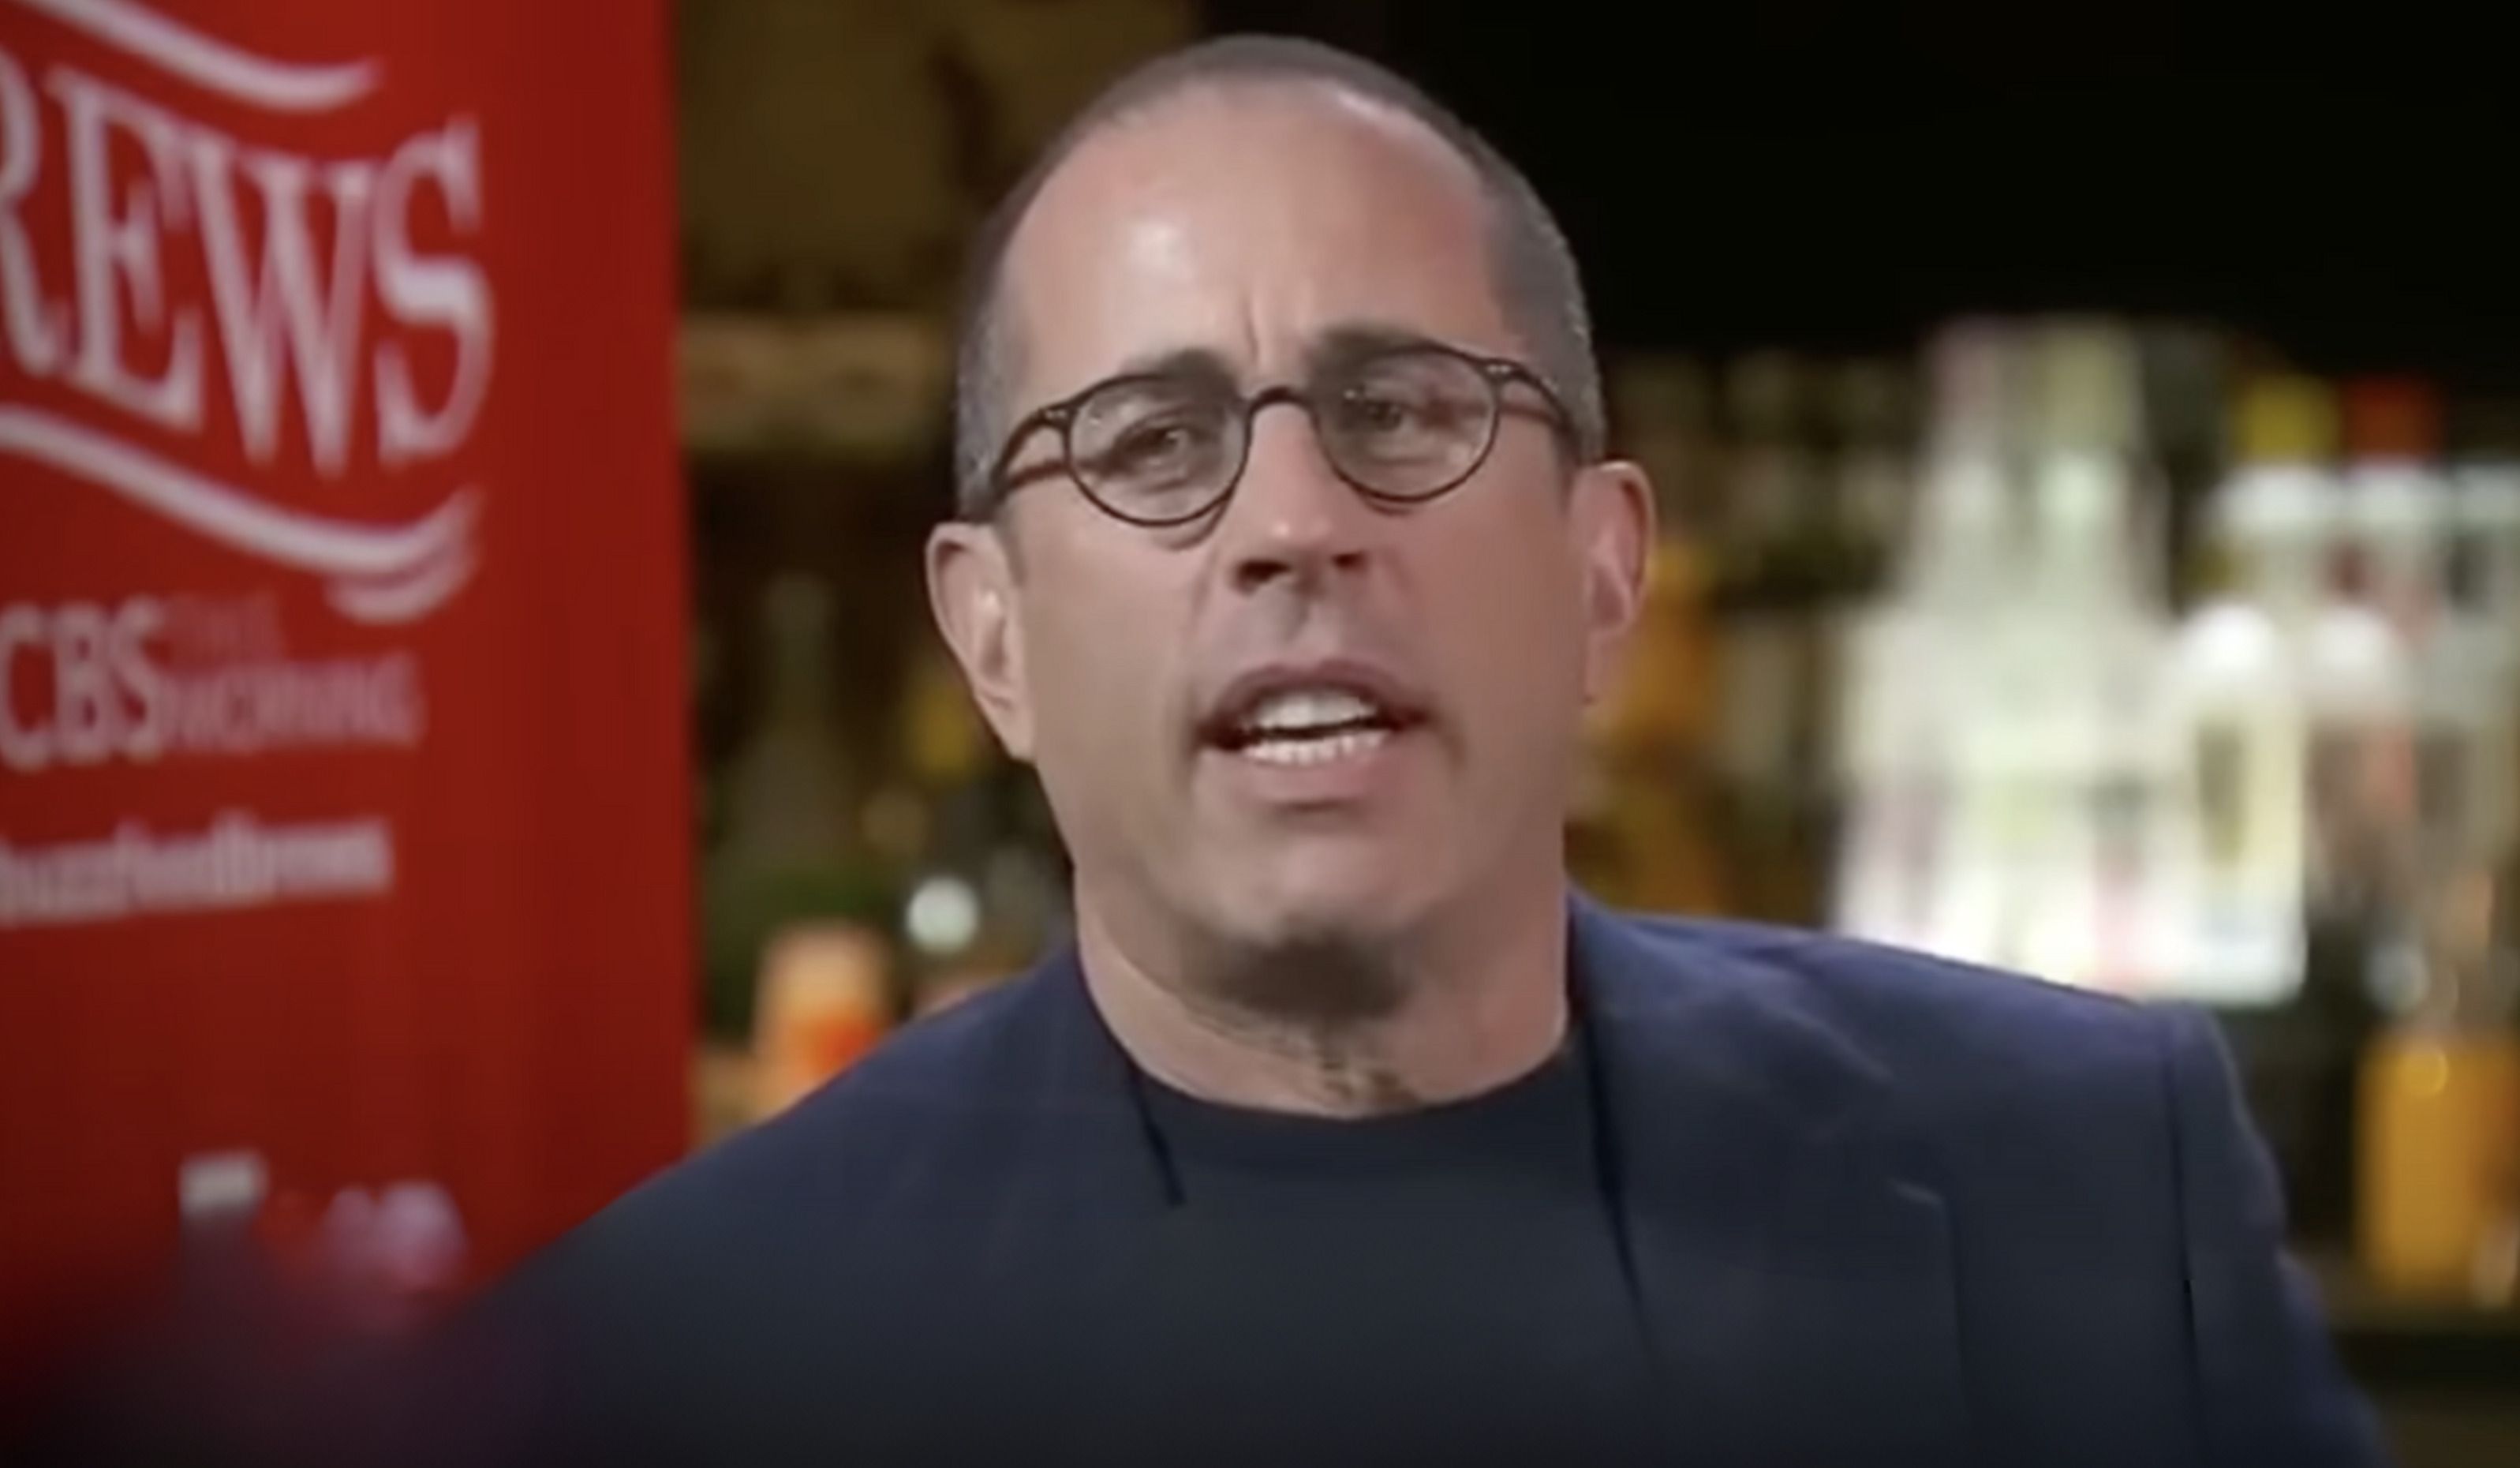 ‘Seinfeld’ Actor Shares Jerry Seinfeld’s Concerns About Leftists Ruining Comedy